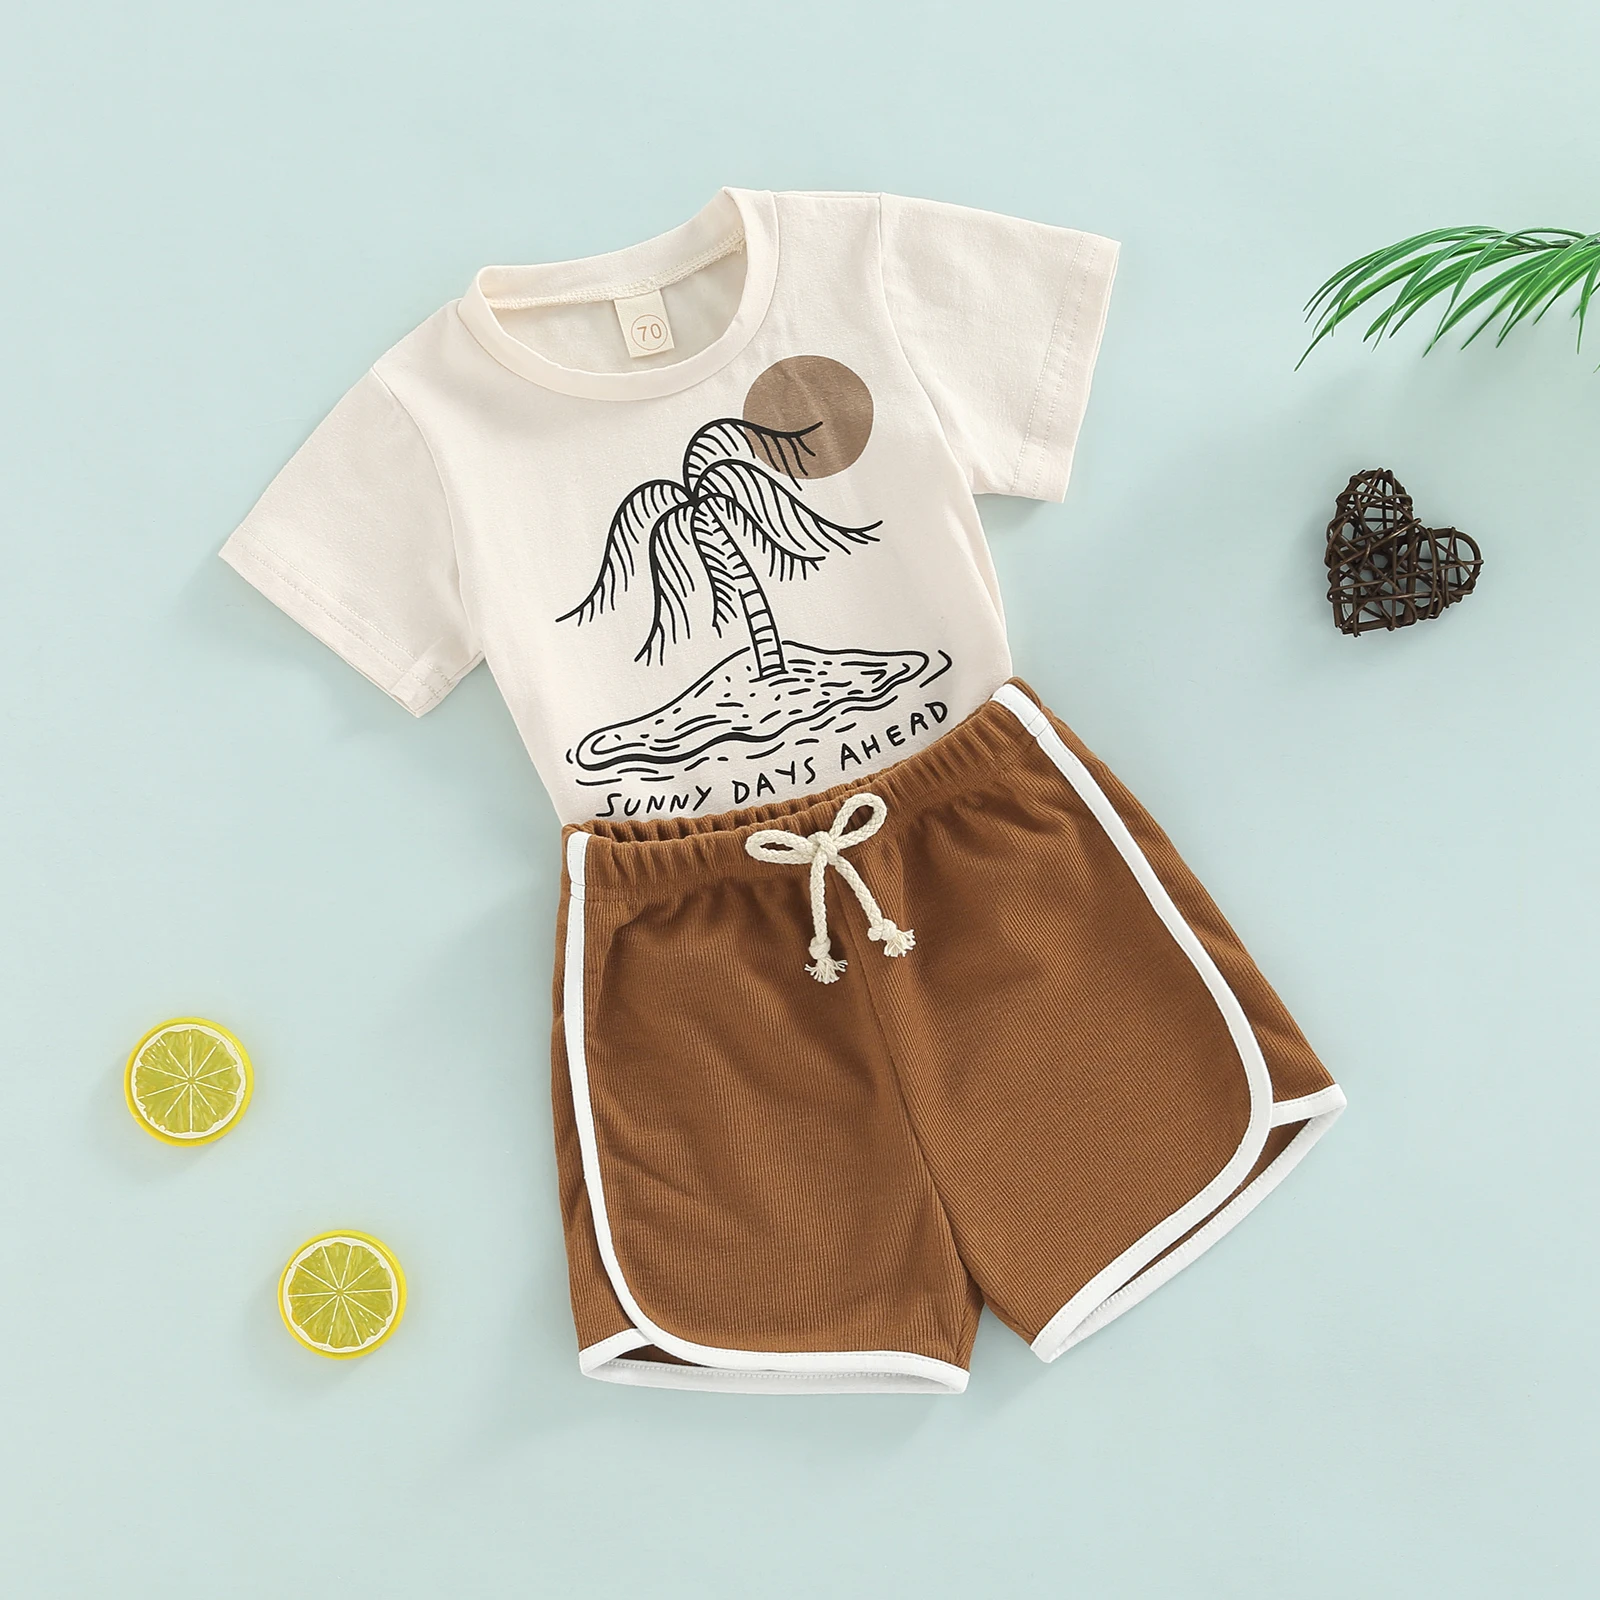 small baby clothing set	 2022 0-24M Baby Boy Girl Clothing Tree Sun Letter Print Short Sleeve Round Neck T-Shirt Tops+High Waist Cute Shorts Summer 2pcs baby clothes in sets	